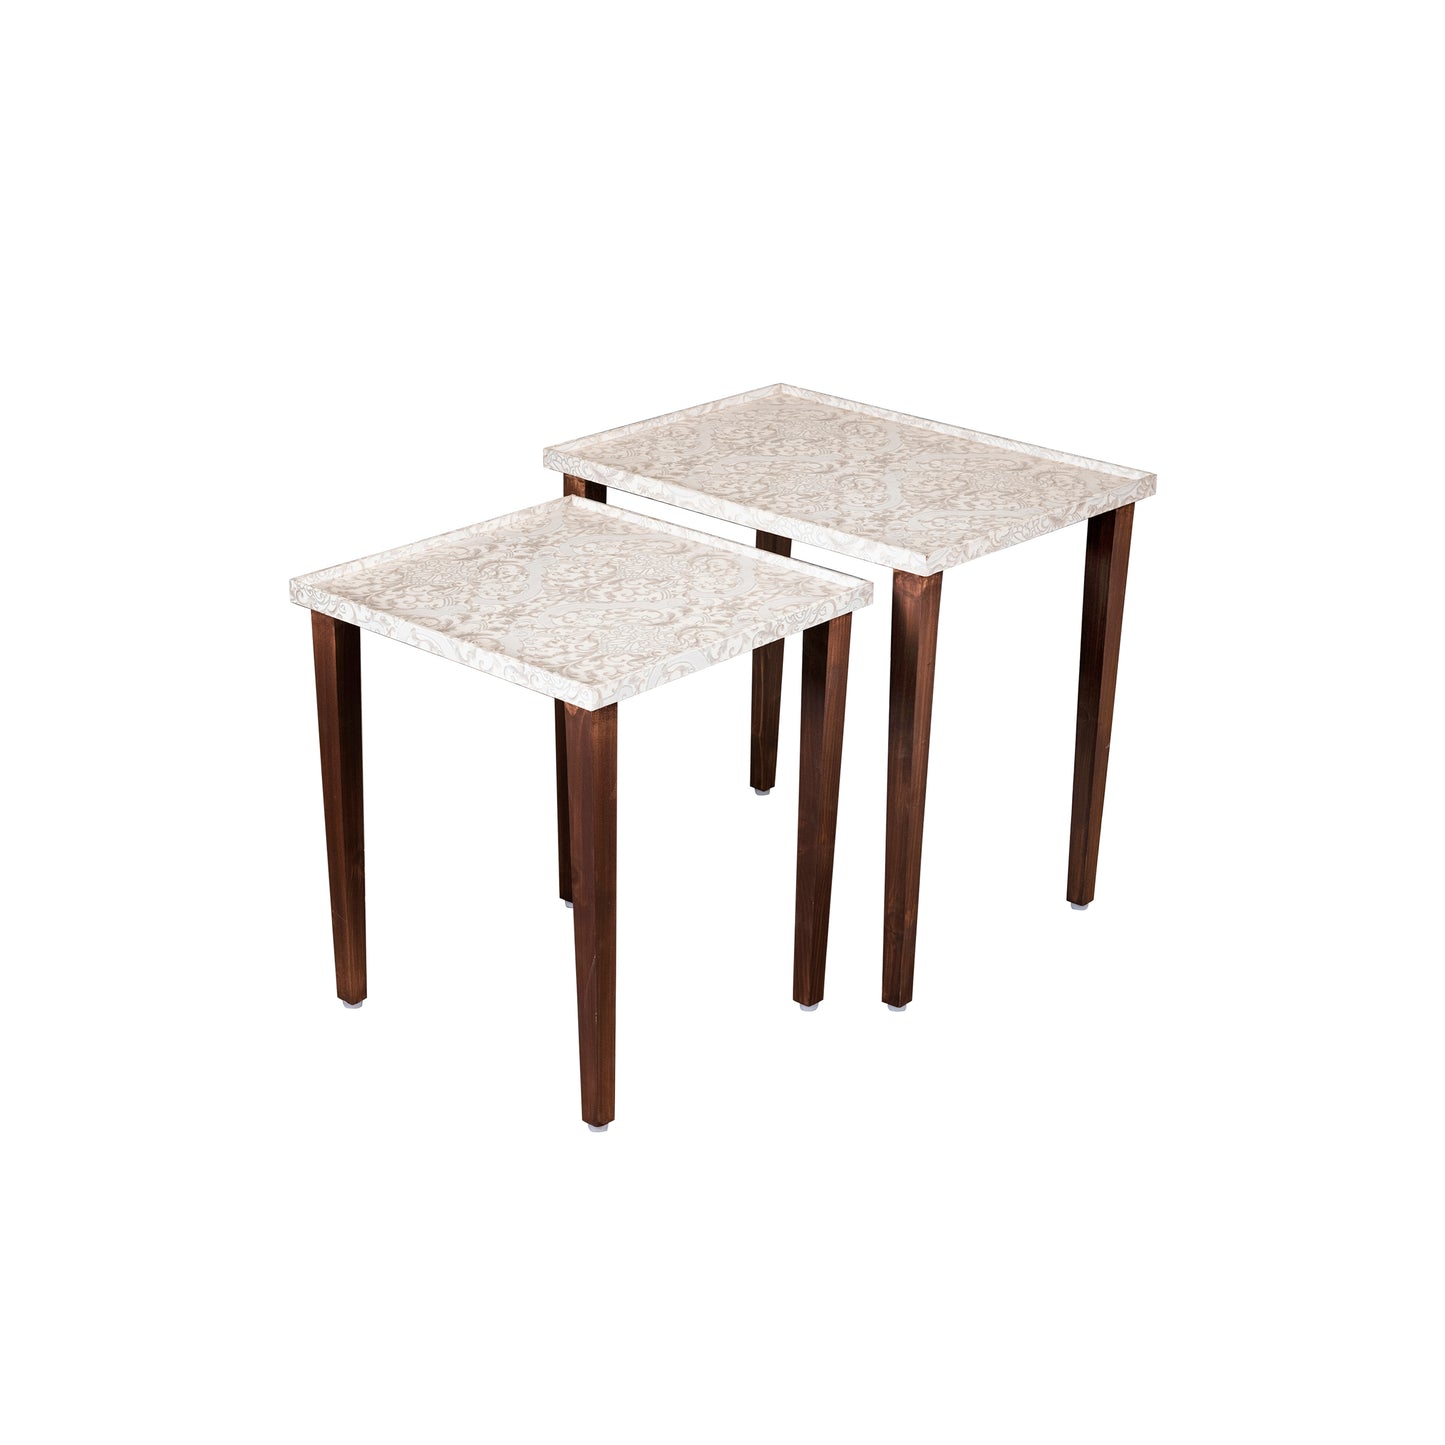 A Tiny Mistake Chantilly Wooden Rectangle Nesting Tables (Set of 2), Living Room Decor